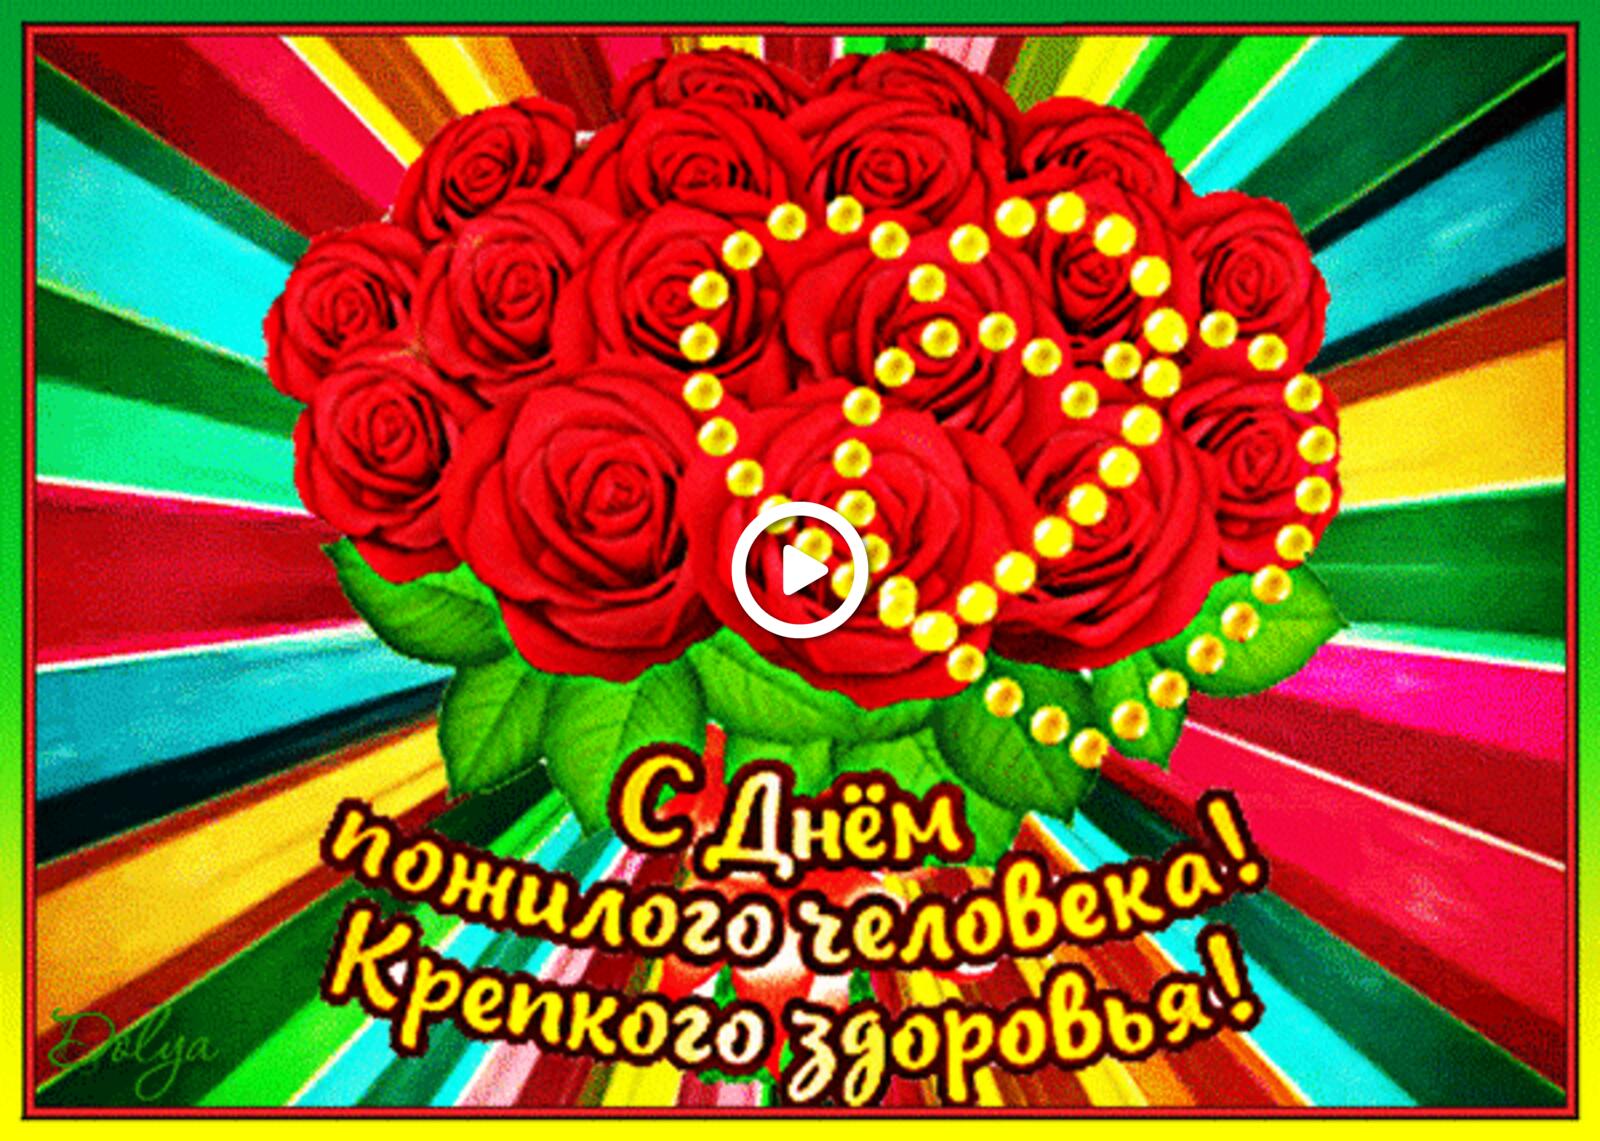 A postcard on the subject of happy elderly day flowers congratulation for free